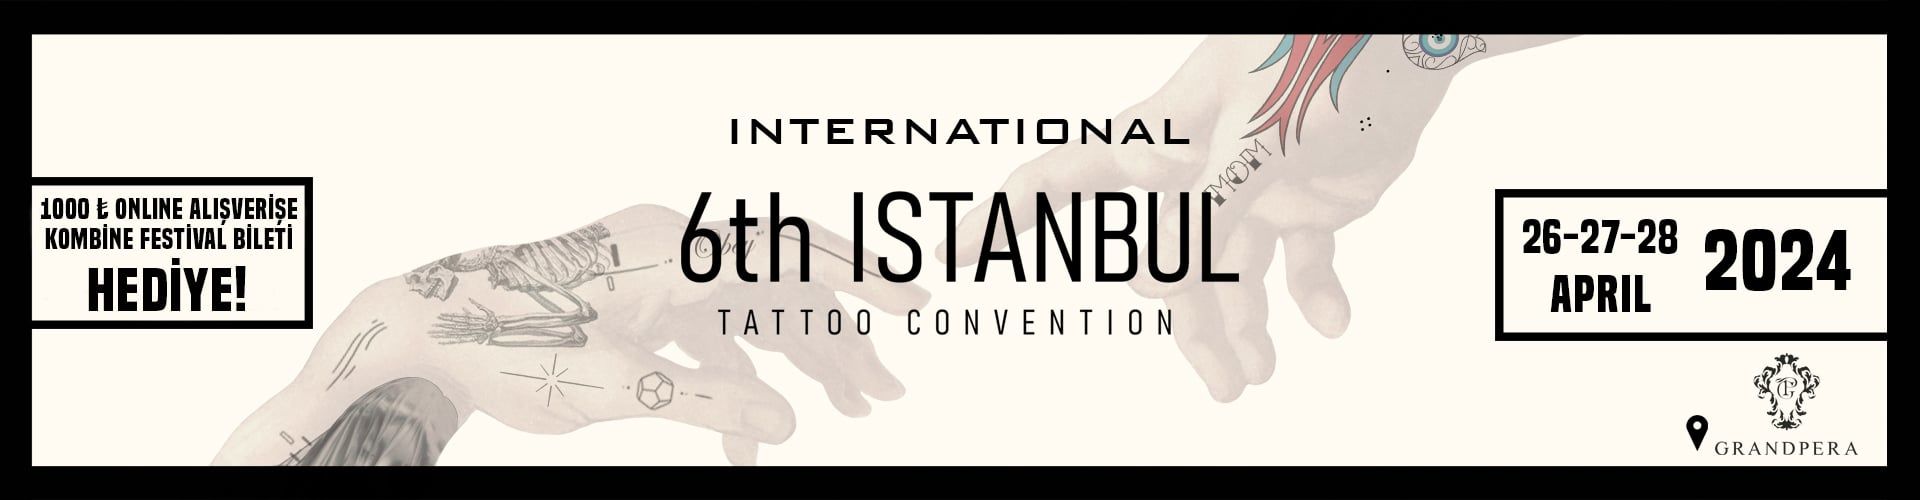 ISTANBUL TATTOO CONVENTION